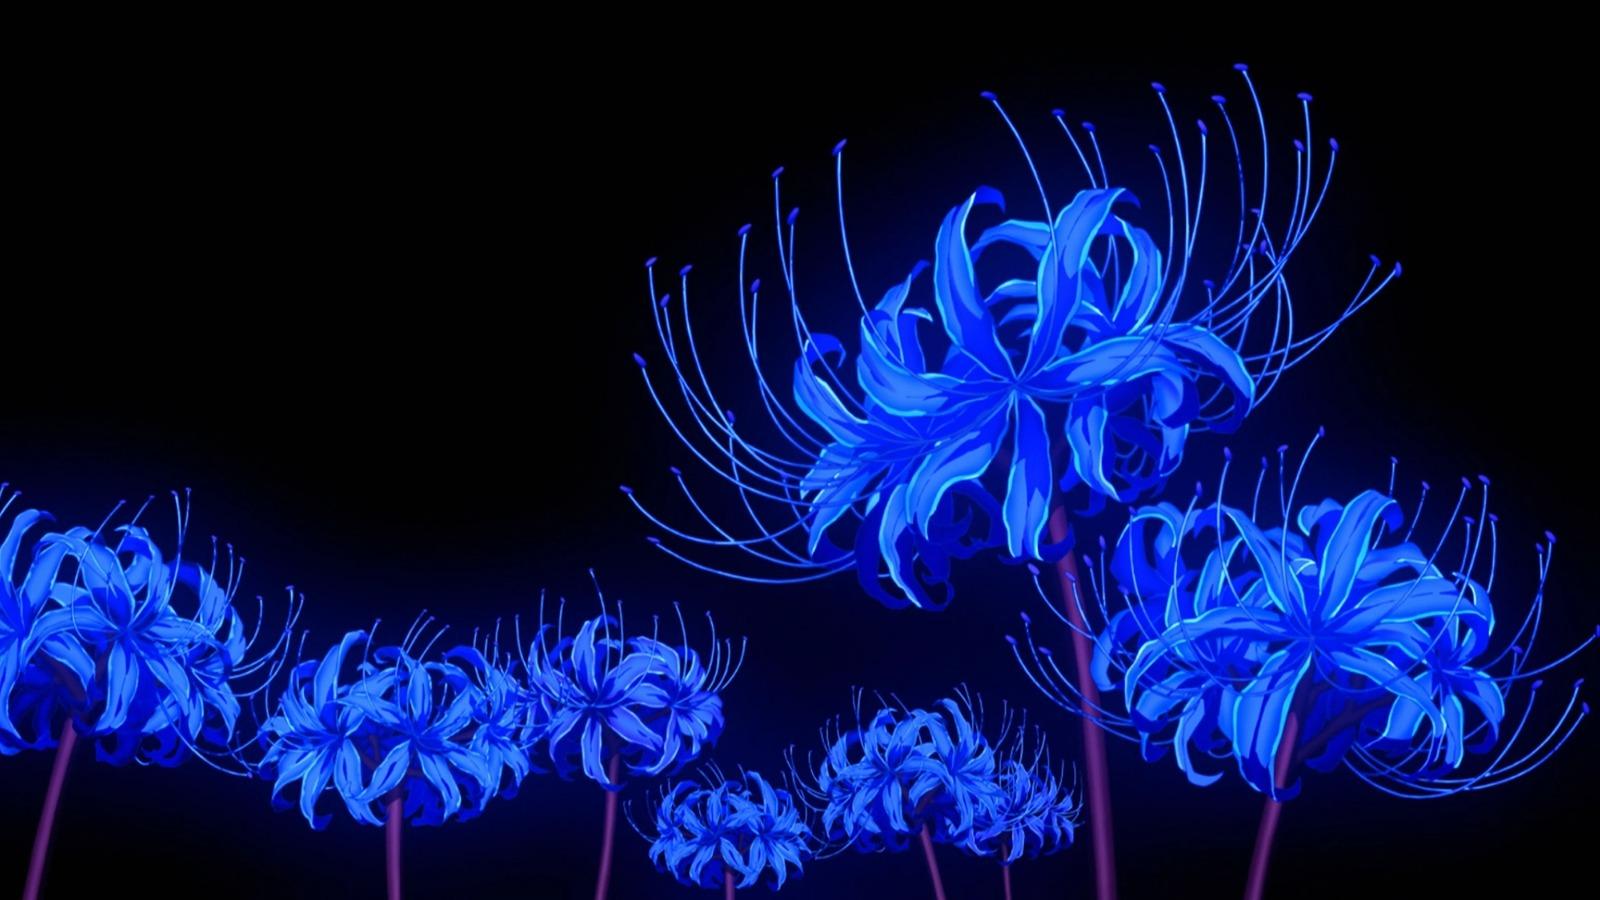 An image of the mythical blue spider lily from Demon Slayer